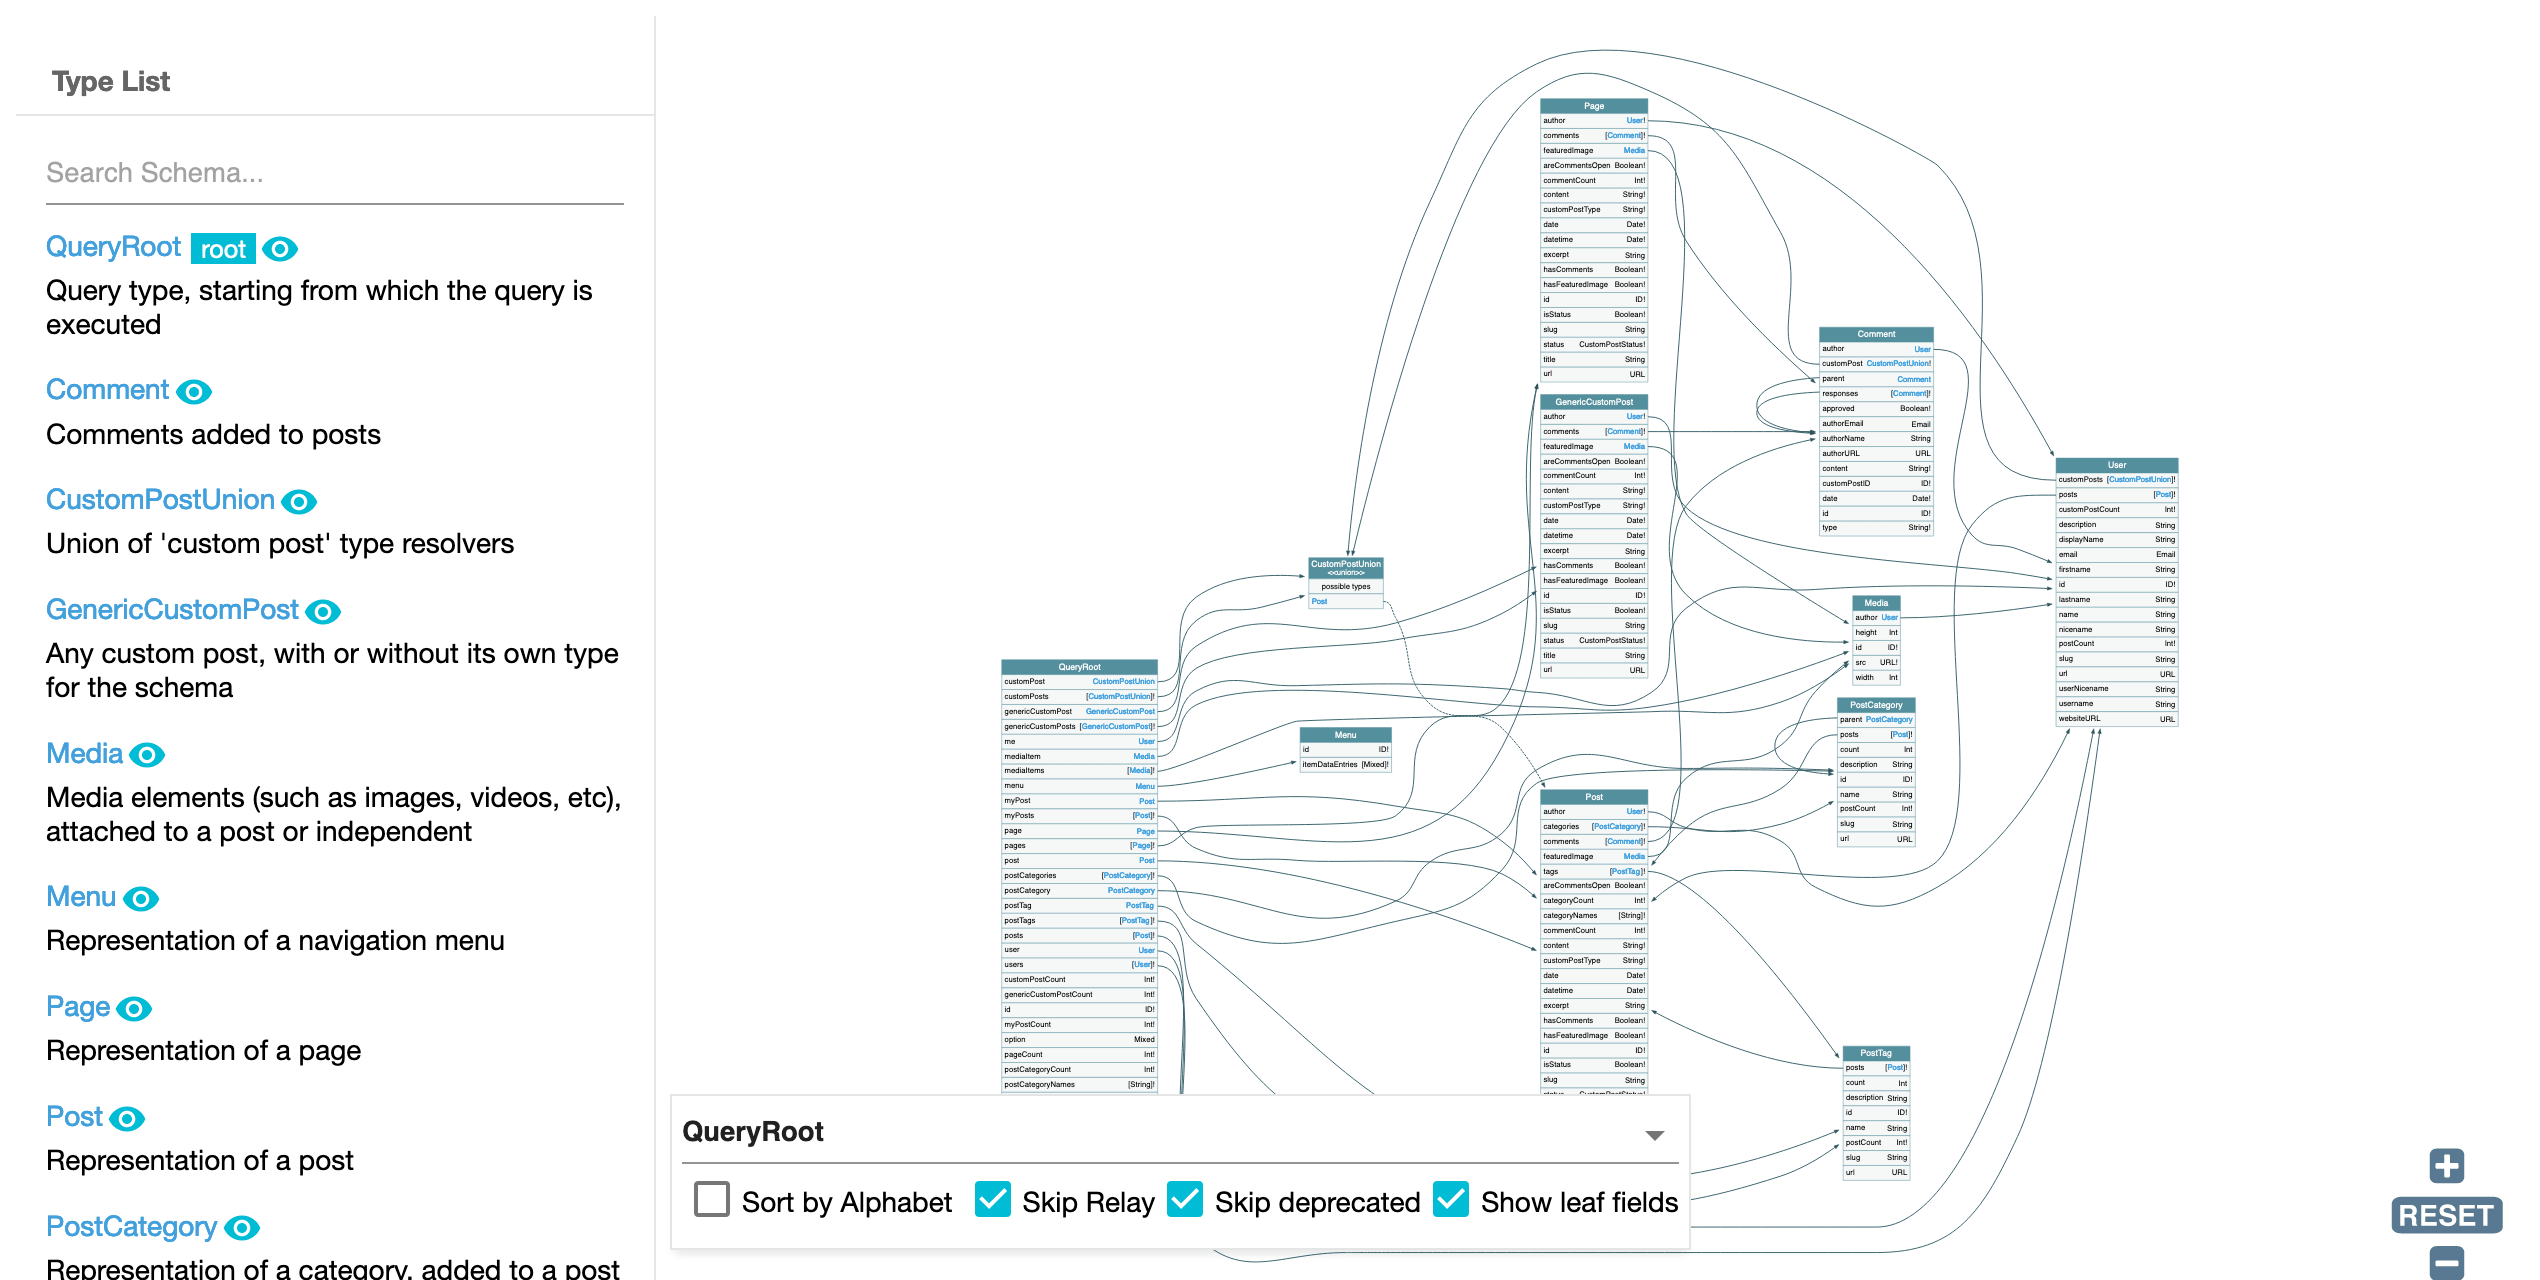 Visualizing the schema for querying data